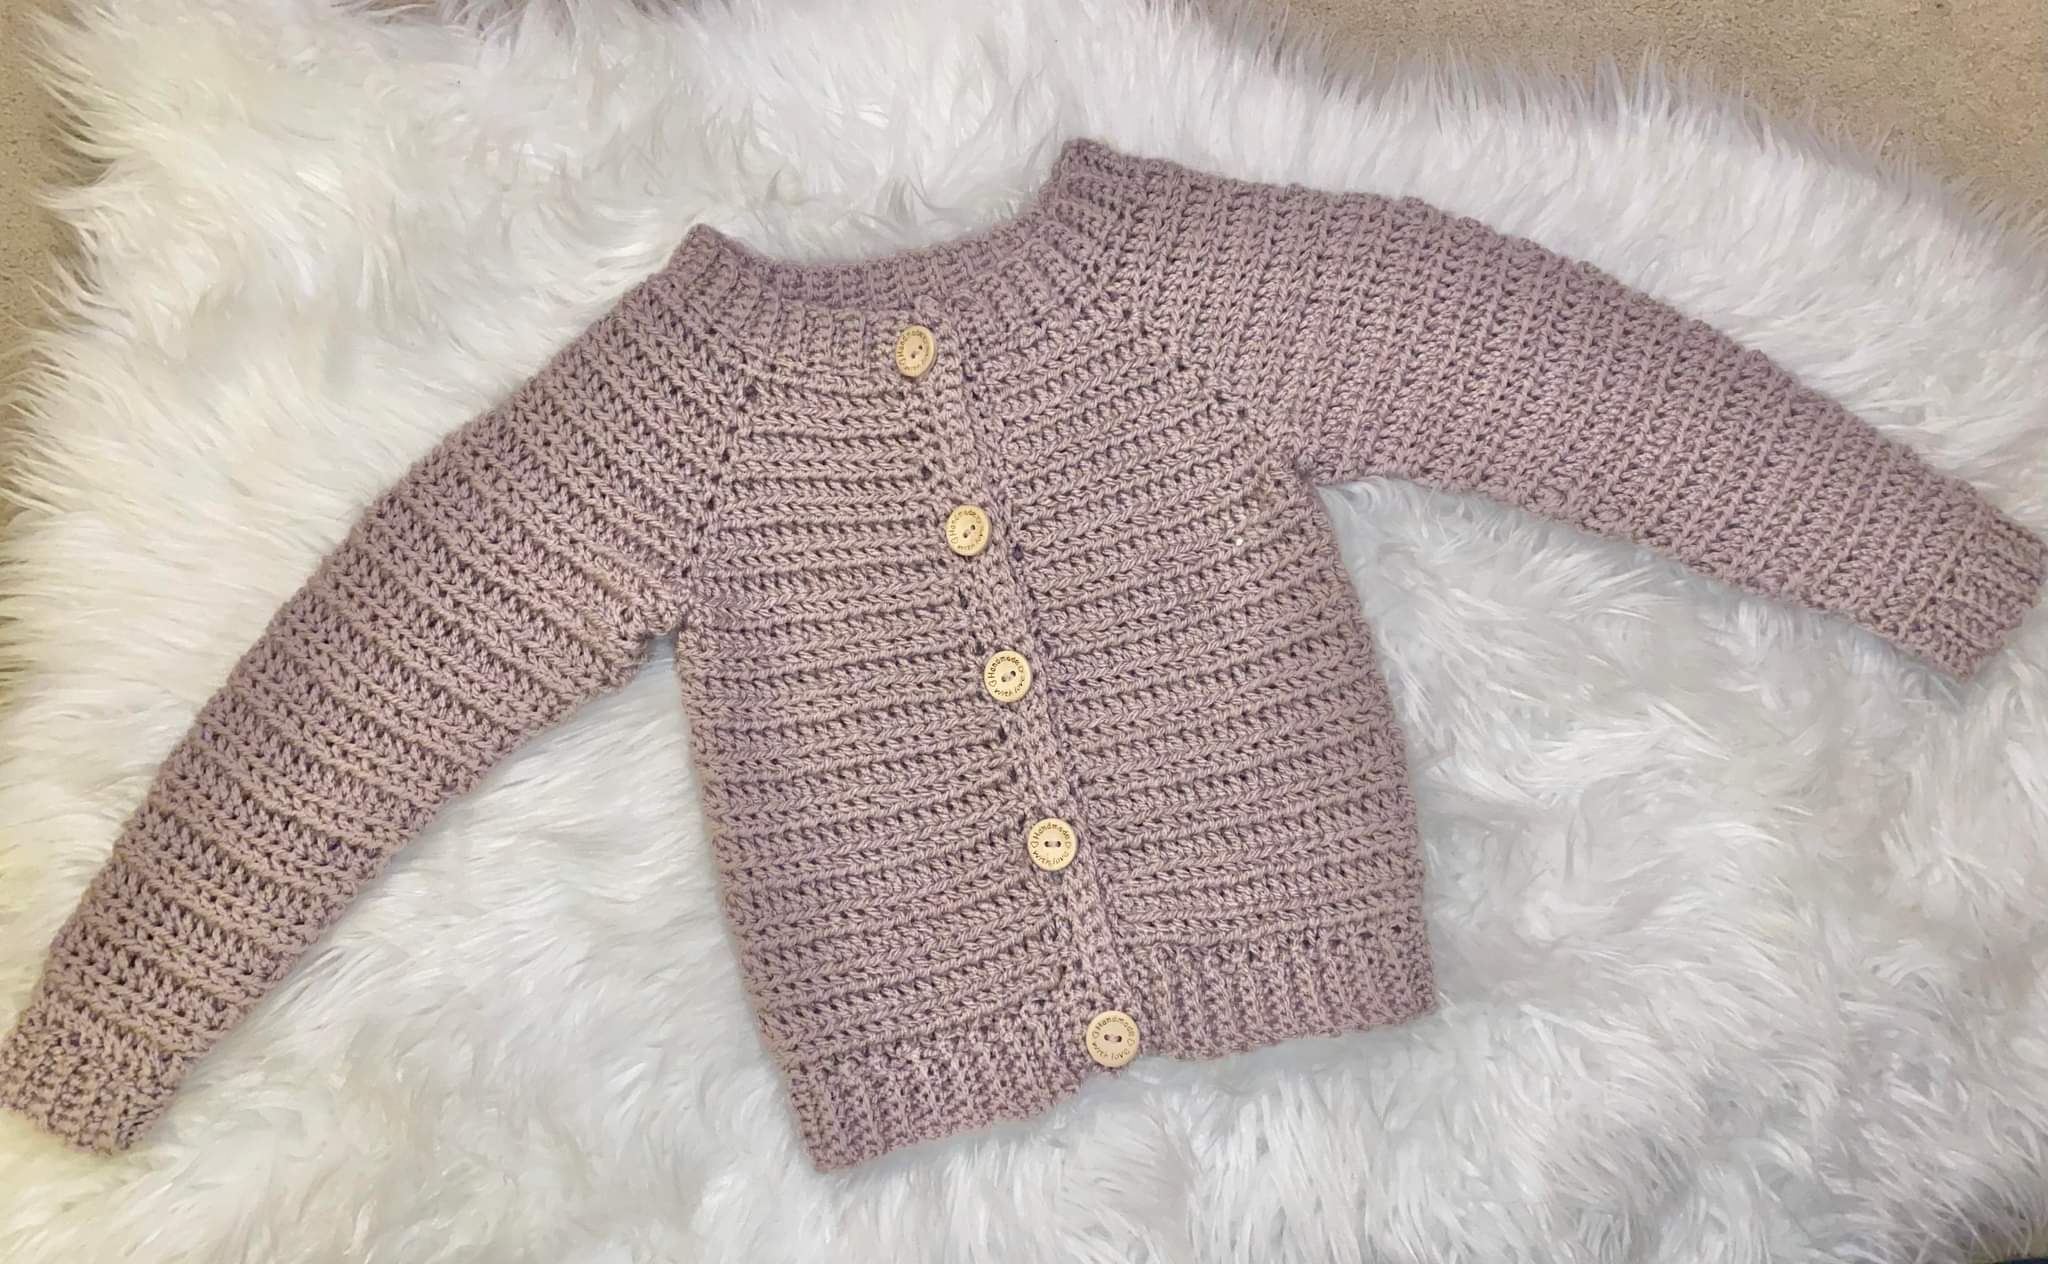 This child's crochet cardigan pattern is free on the Sunflower Cottage Crochet blog. 